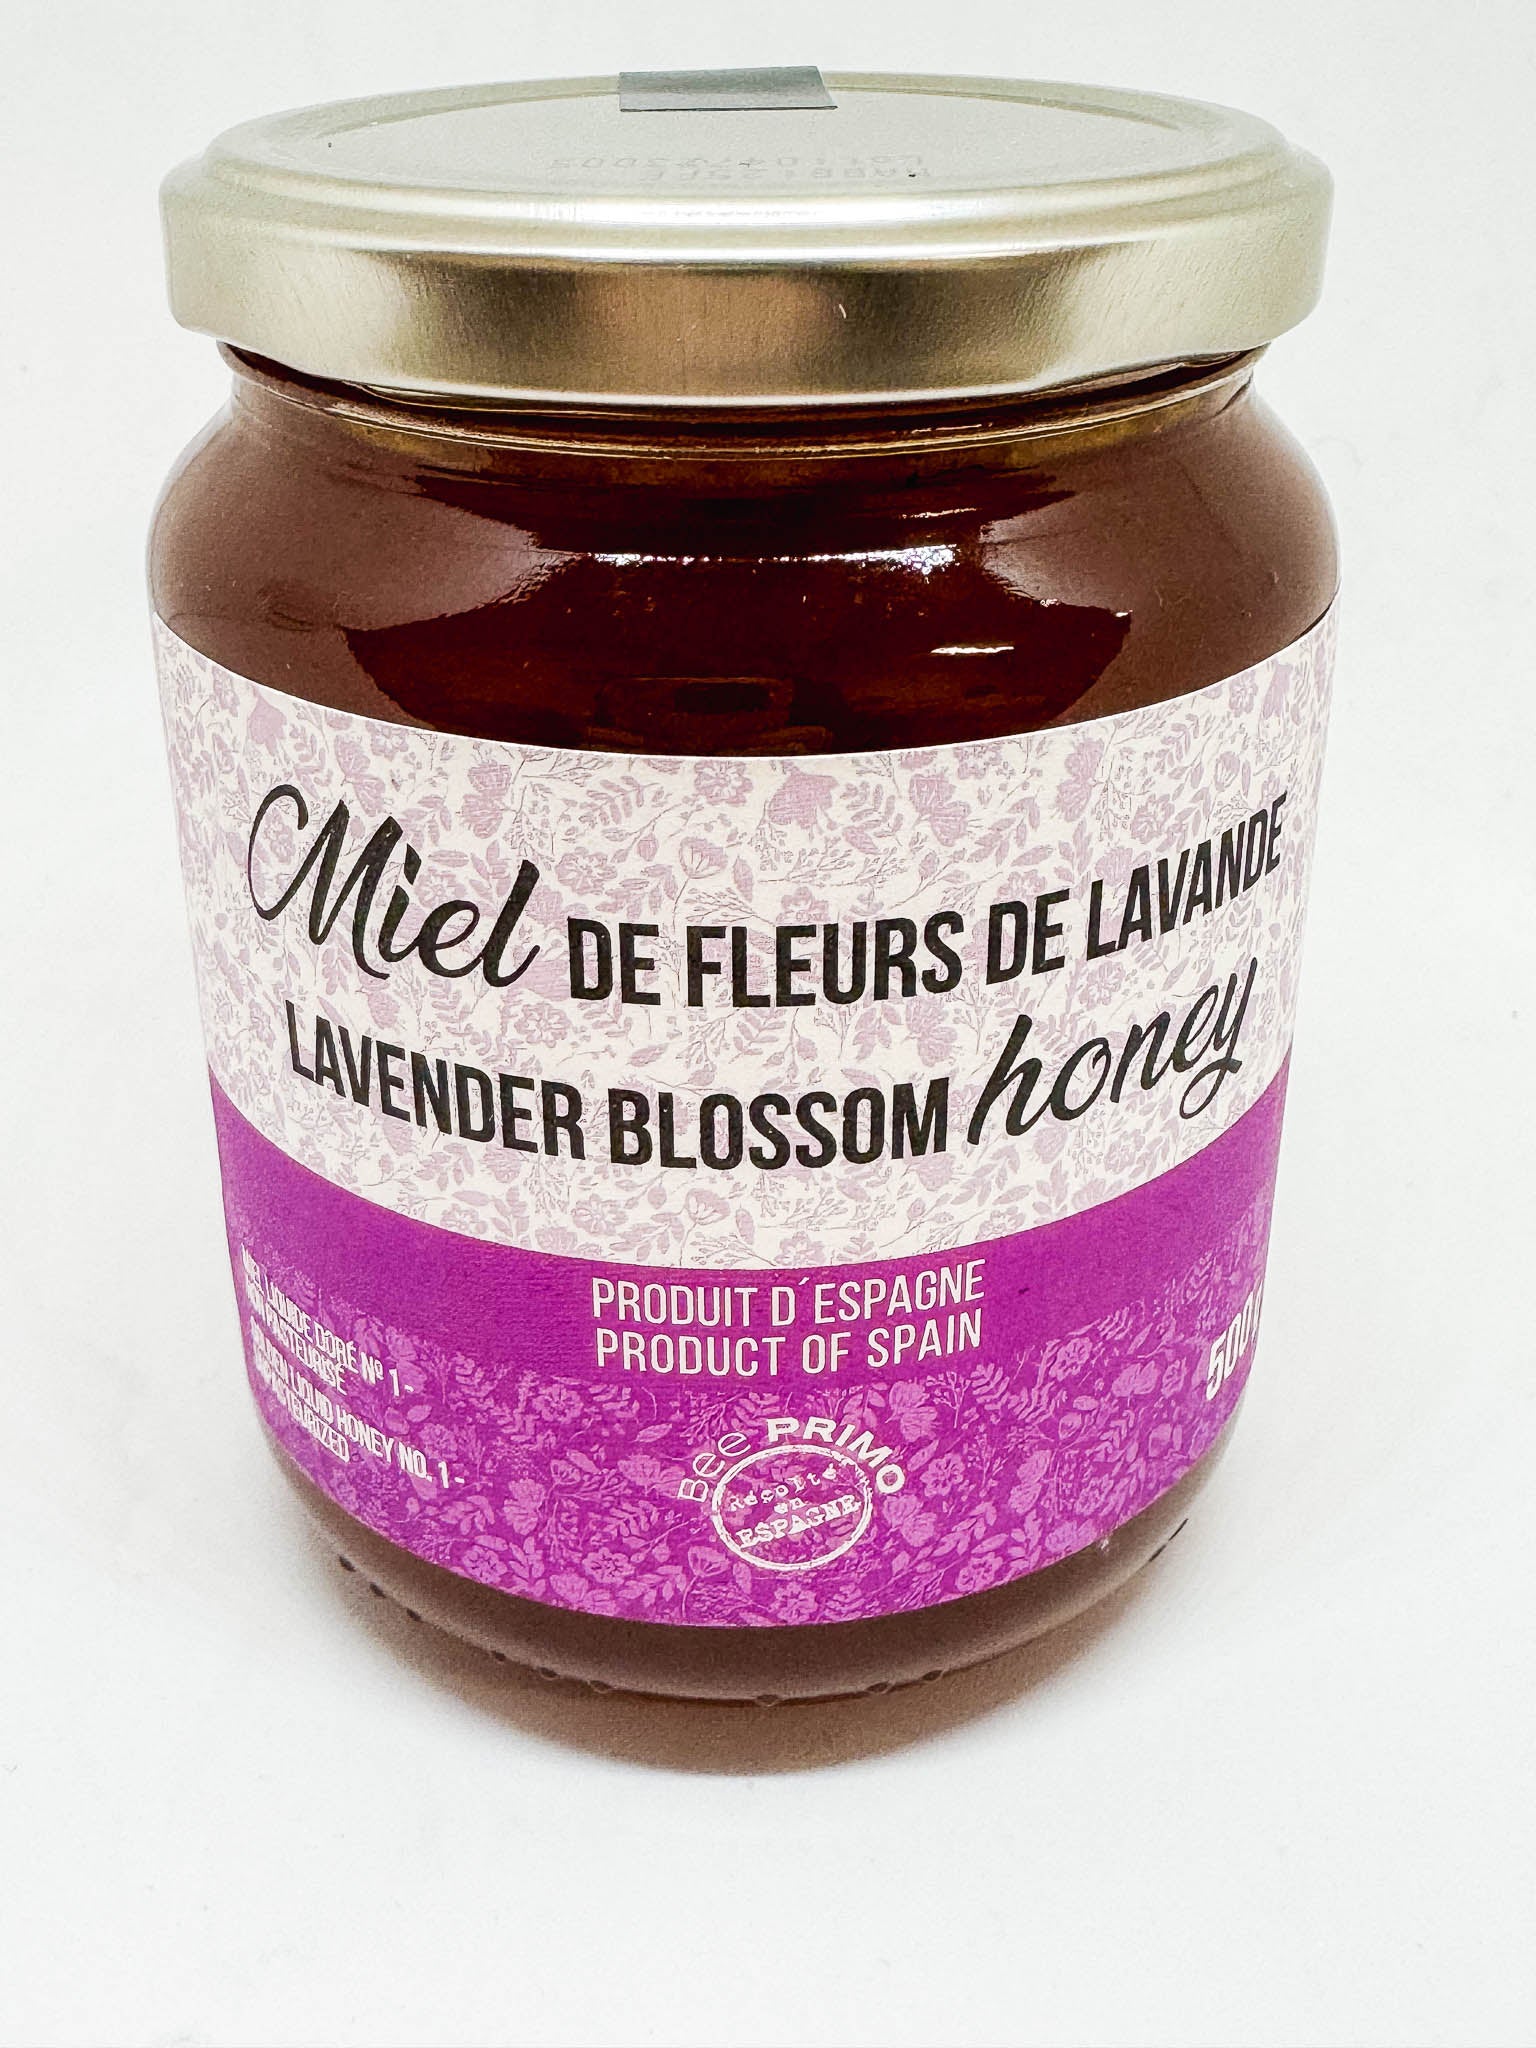 A jar ofSpanish Lavender blossom honey from Bee Primo on a white background